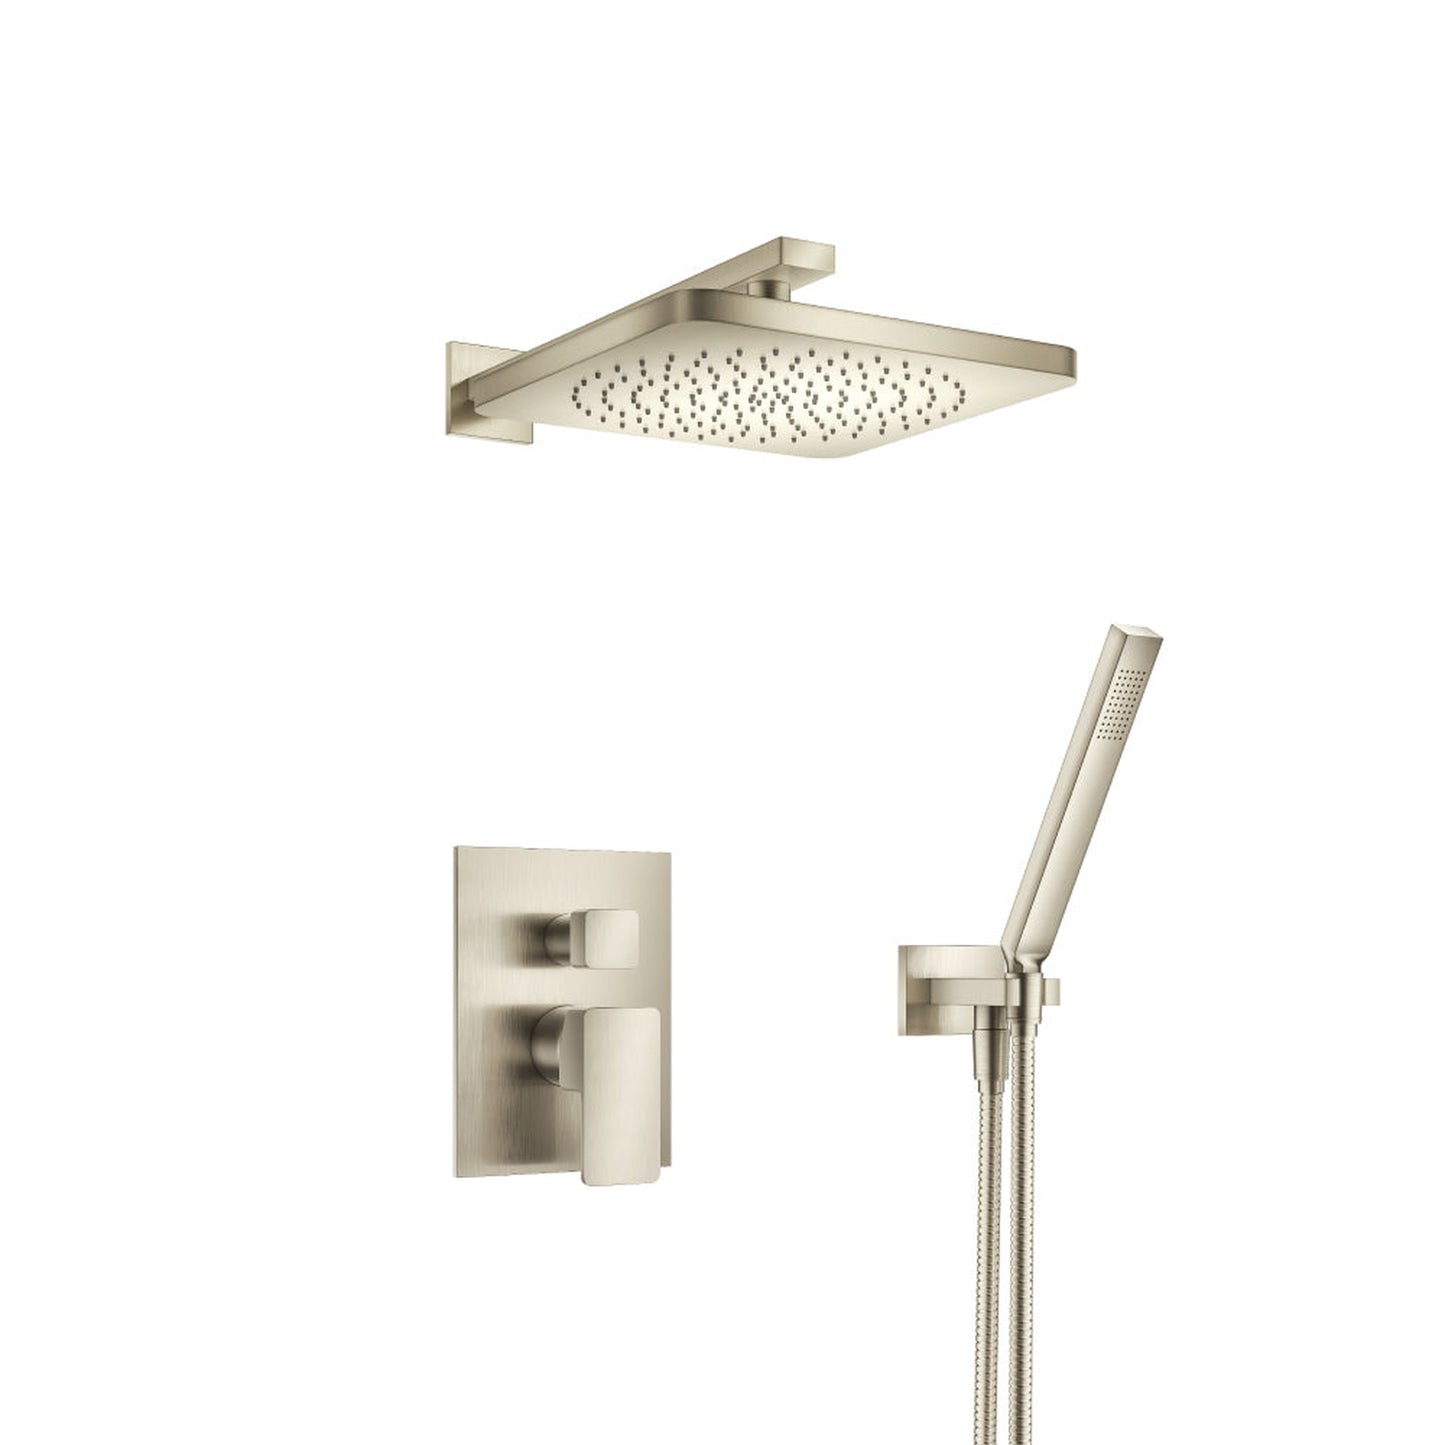 Isenberg Serie 196 Two Output Shower Set With Shower Head and Hand Held in Polished Nickel (196.3300PN)